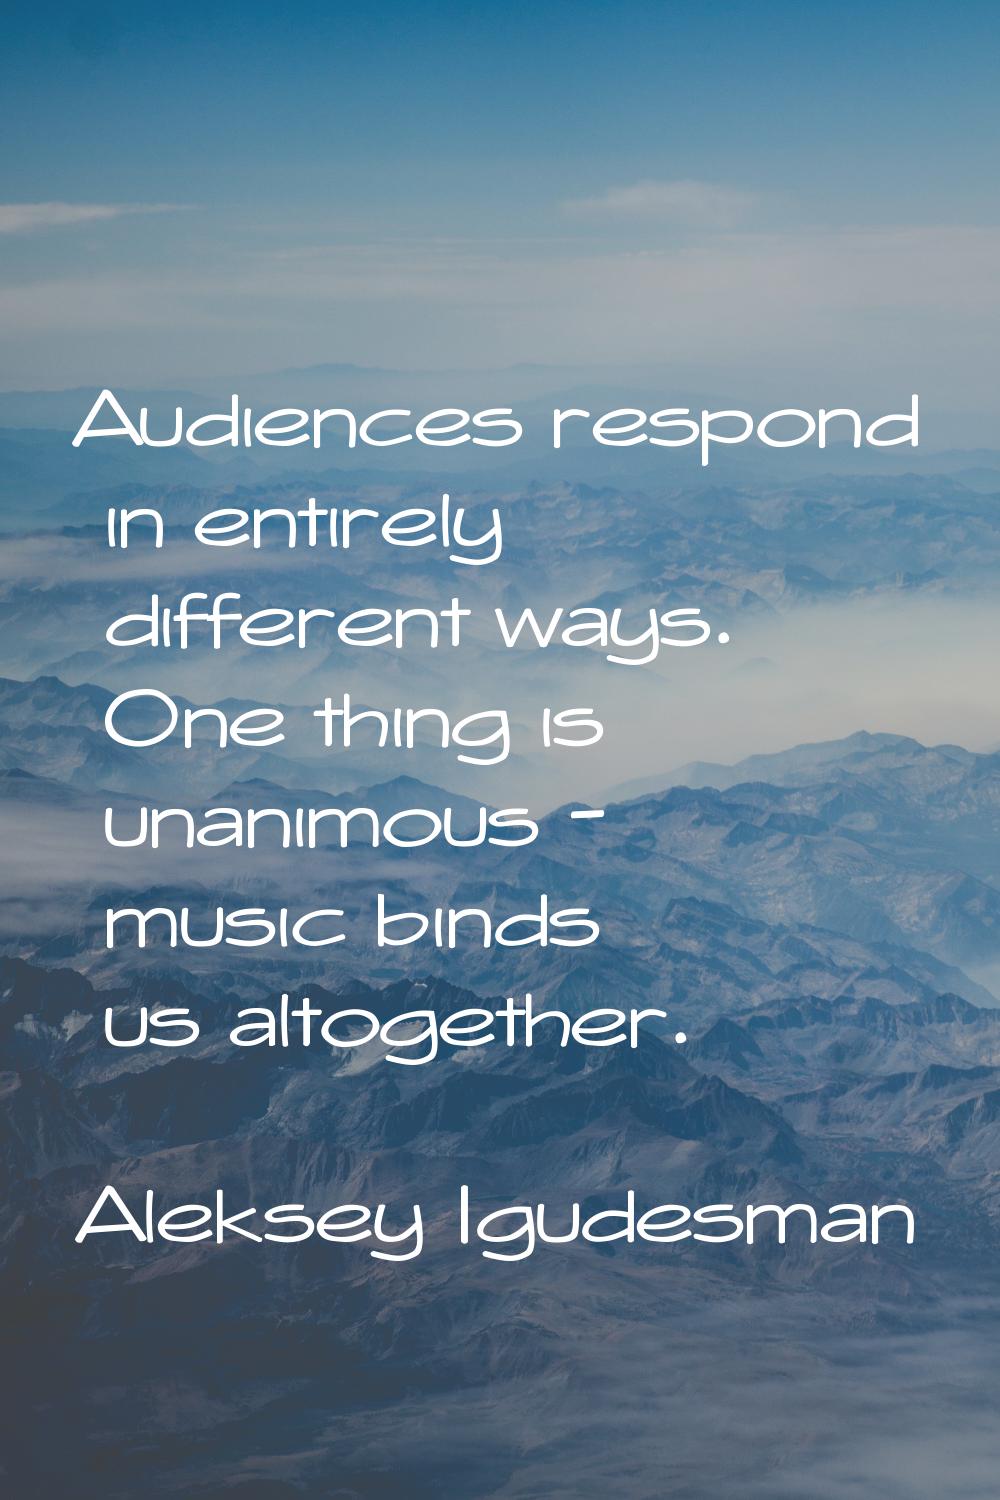 Audiences respond in entirely different ways. One thing is unanimous - music binds us altogether.